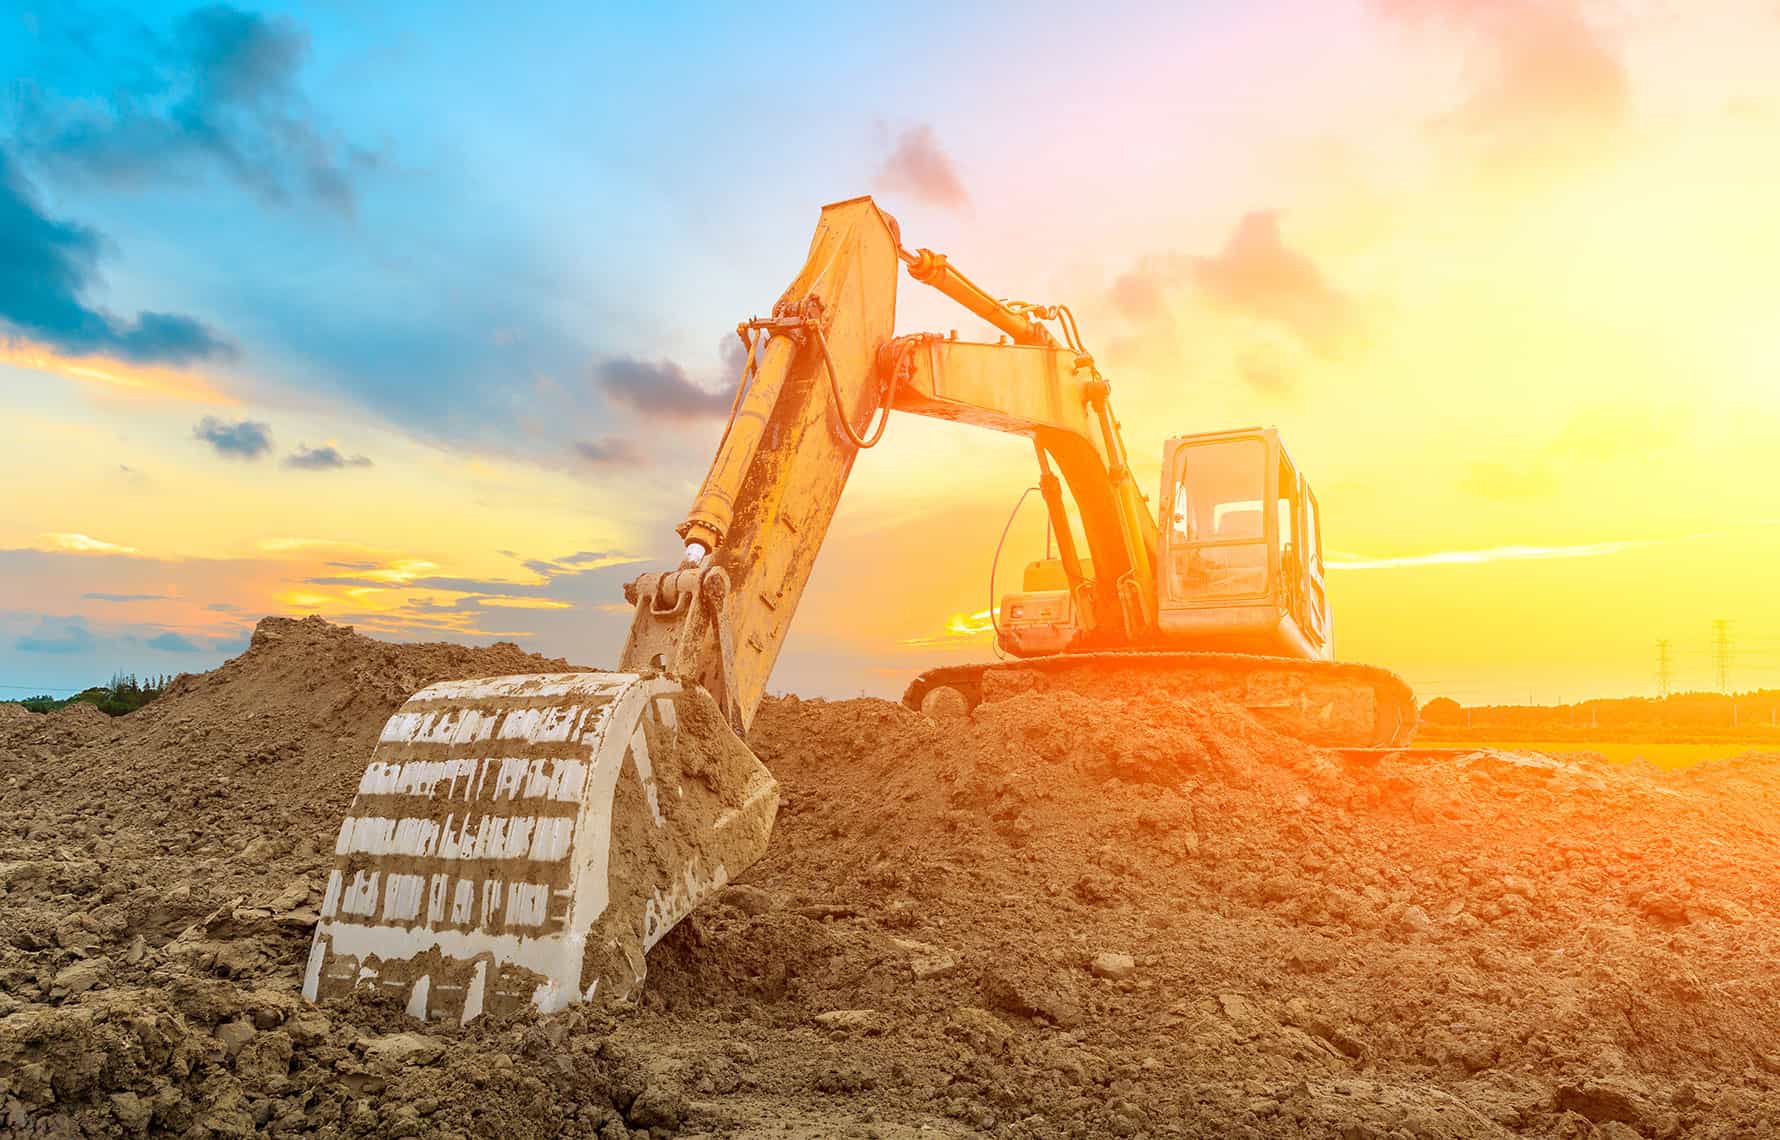 Heavy equipment with a scoop arm moving dirt, surrounded by the glow of the yellow and orange setting sun